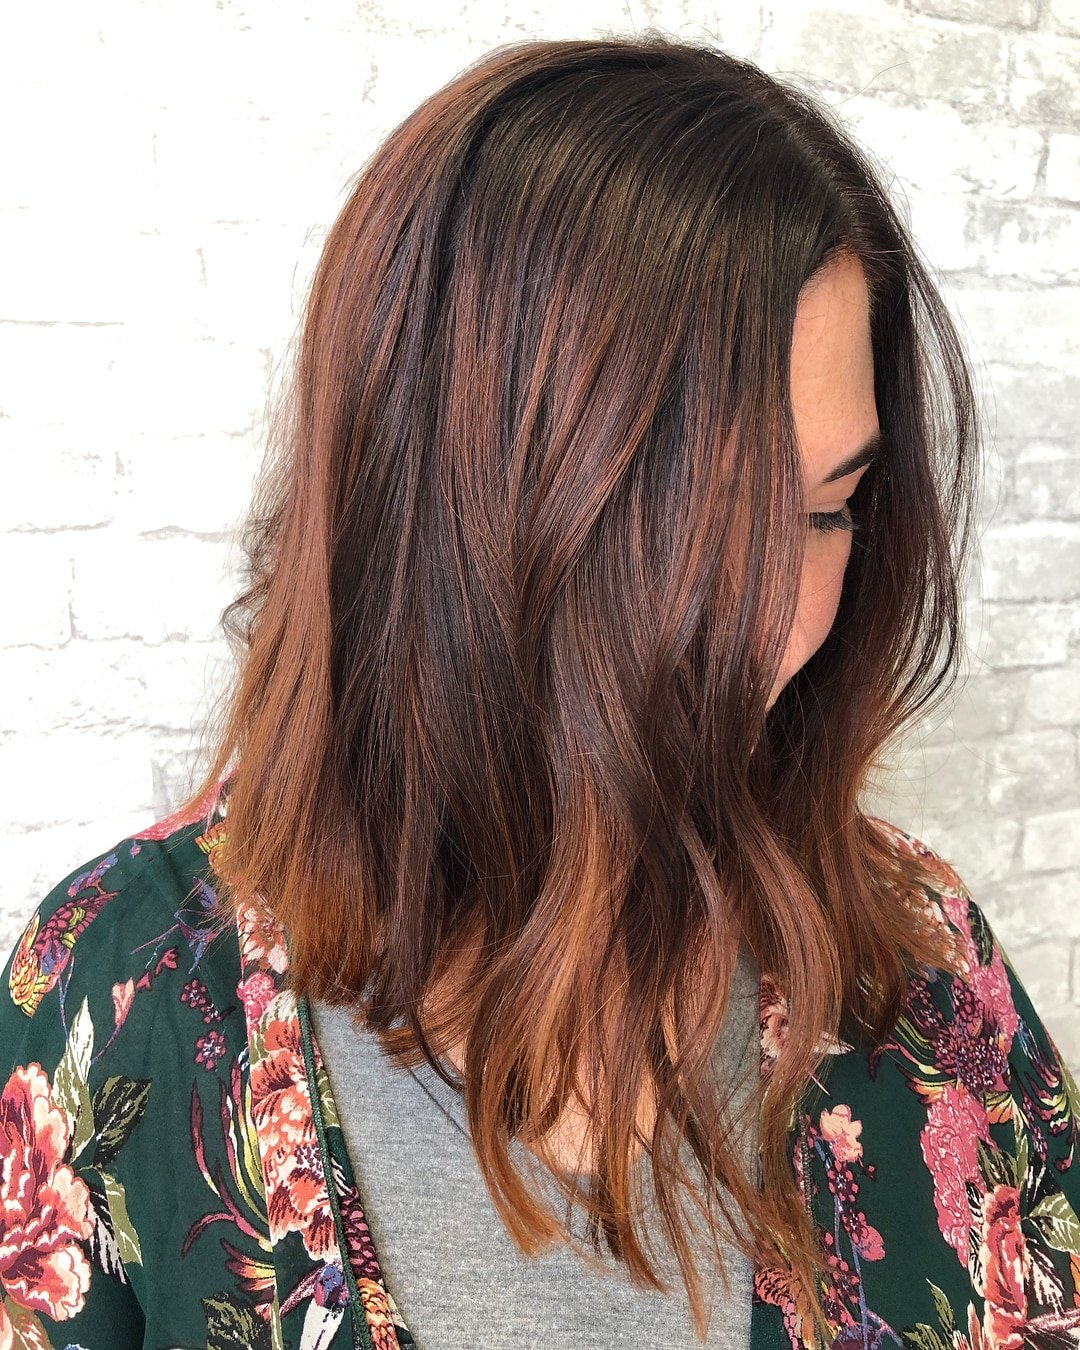 Medium Brown Hair with Fun Copper Red Highlights